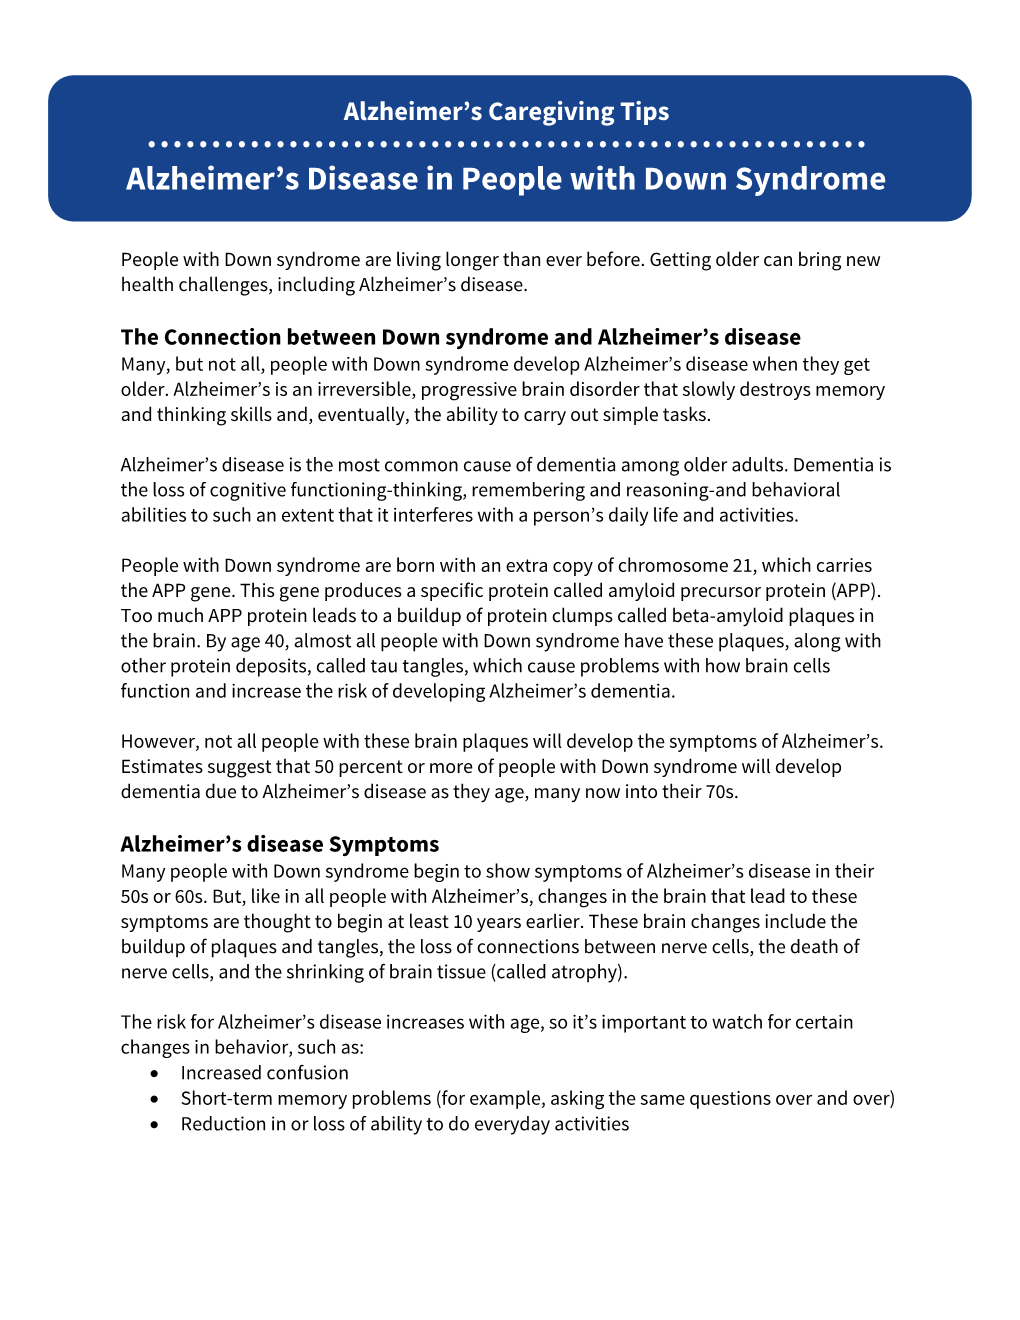 Alzheimer's Disease in People with Down